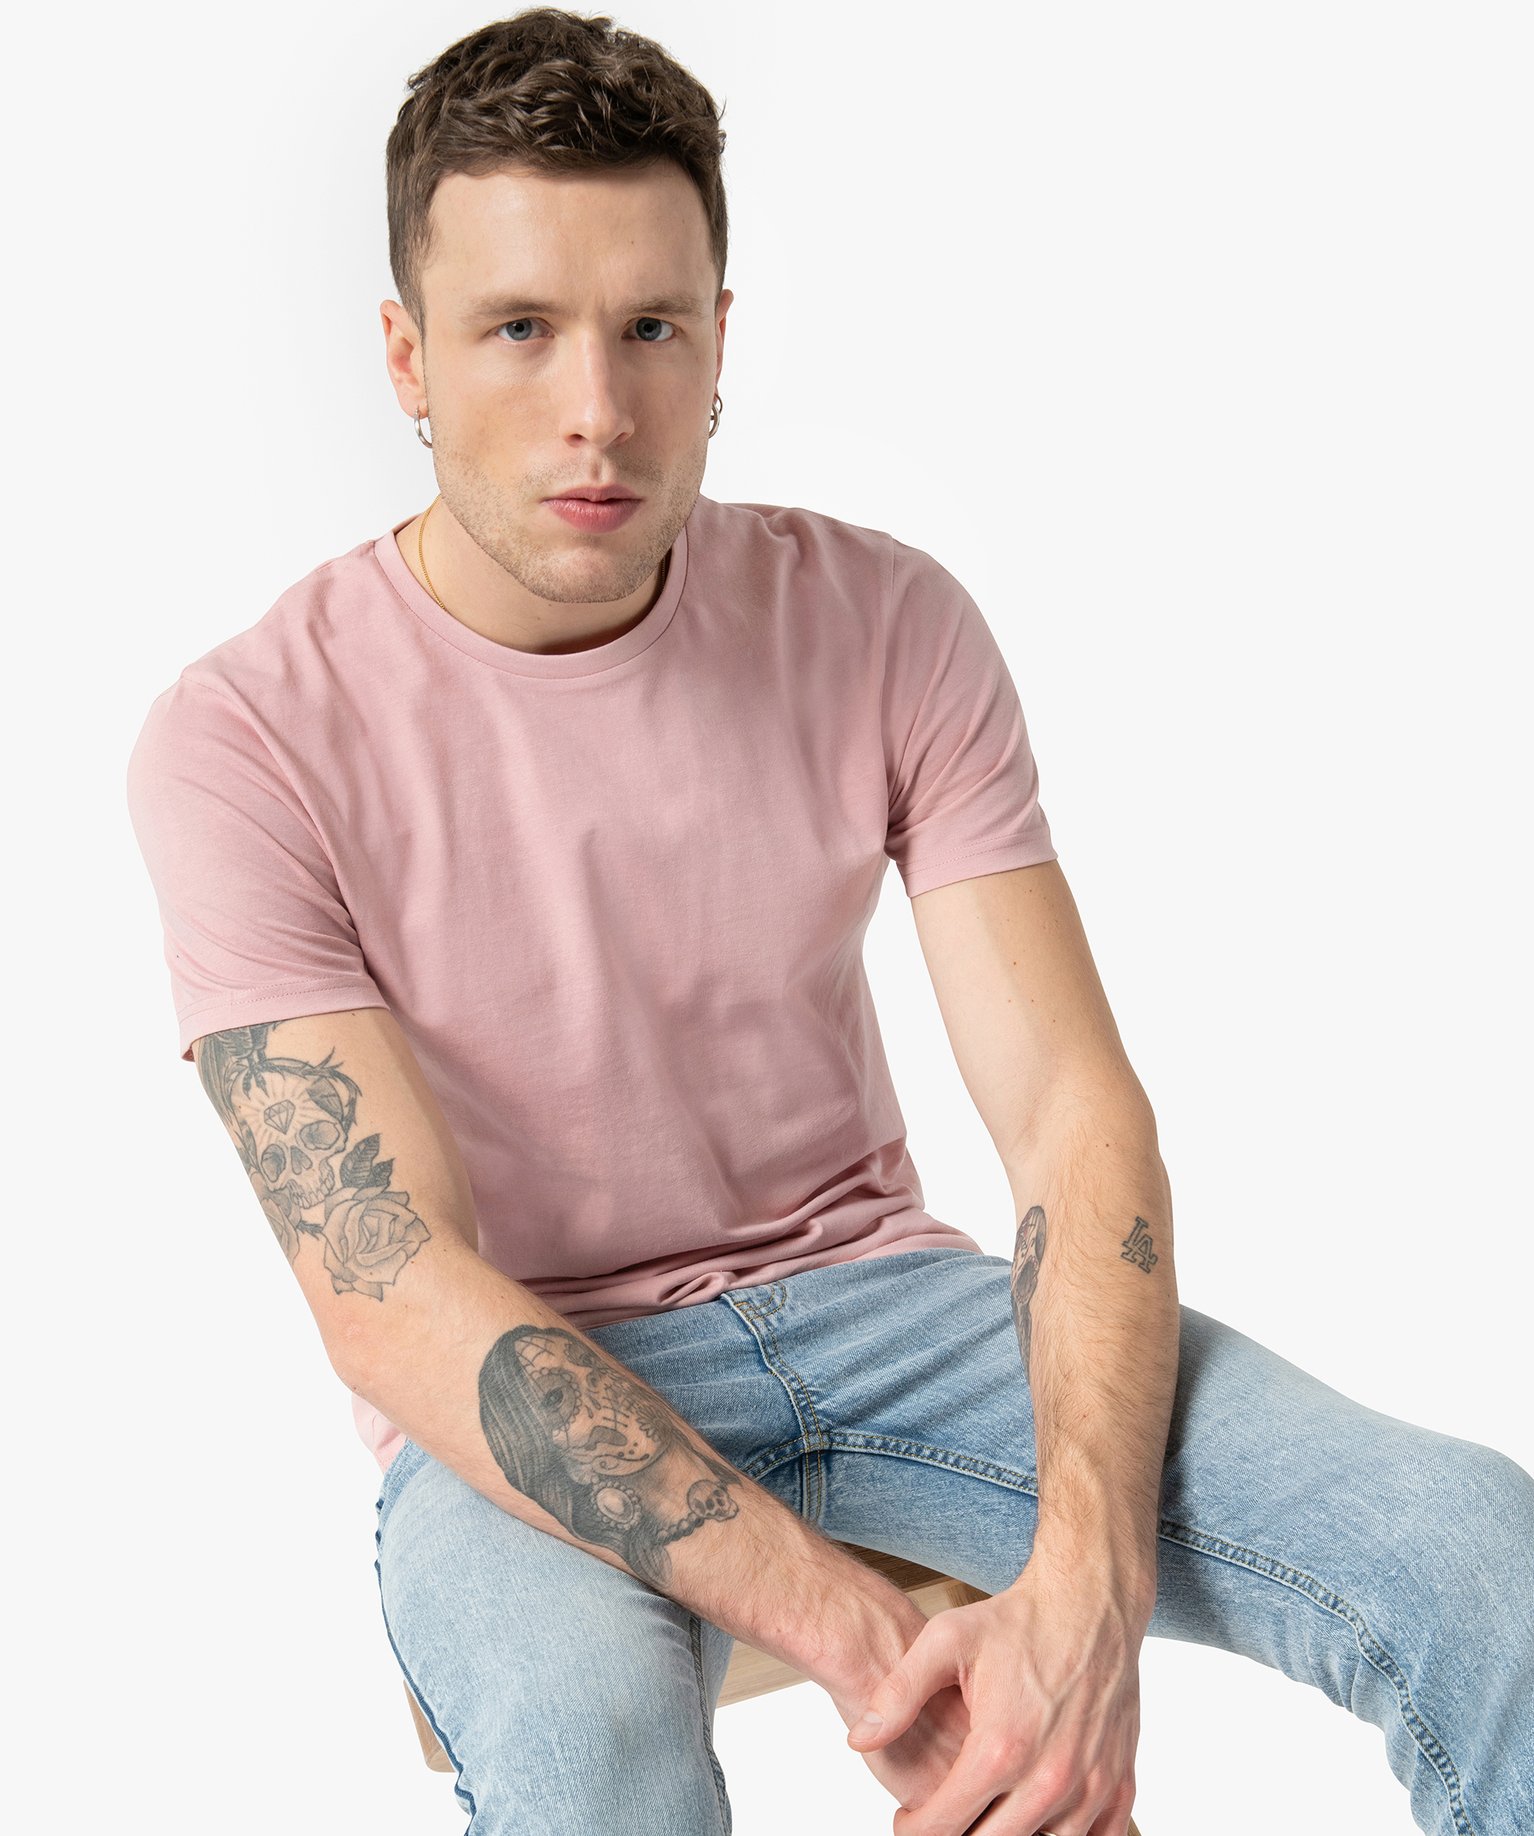 tee-shirt homme a manches courtes et col rond rose tee-shirts